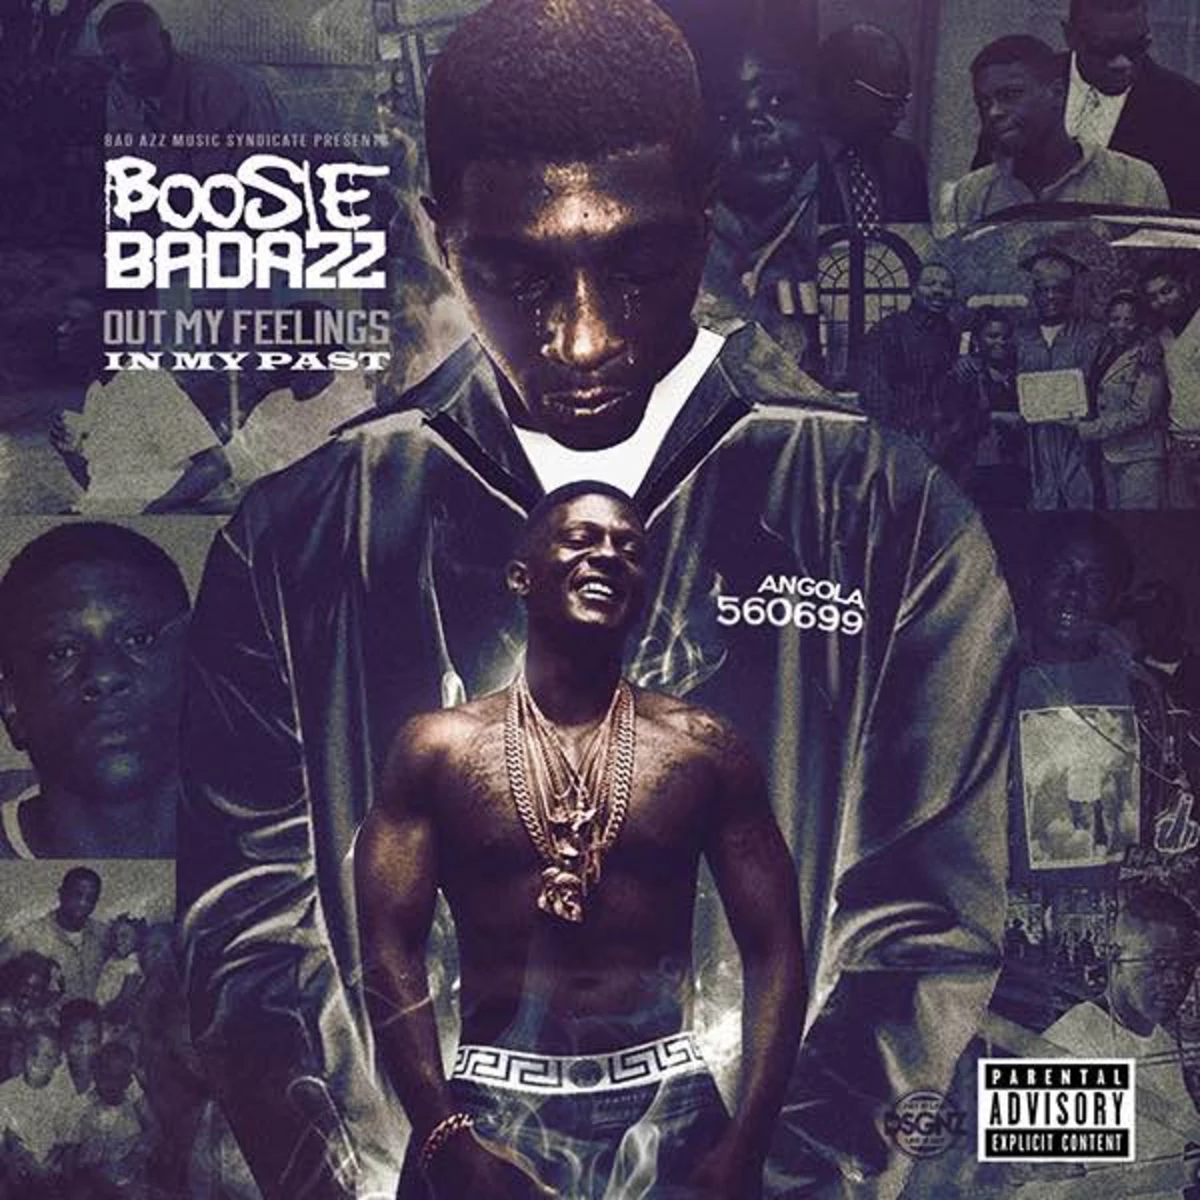 Boosie Badazz Details His Battle With Cancer on ‘Out My Feelings in My